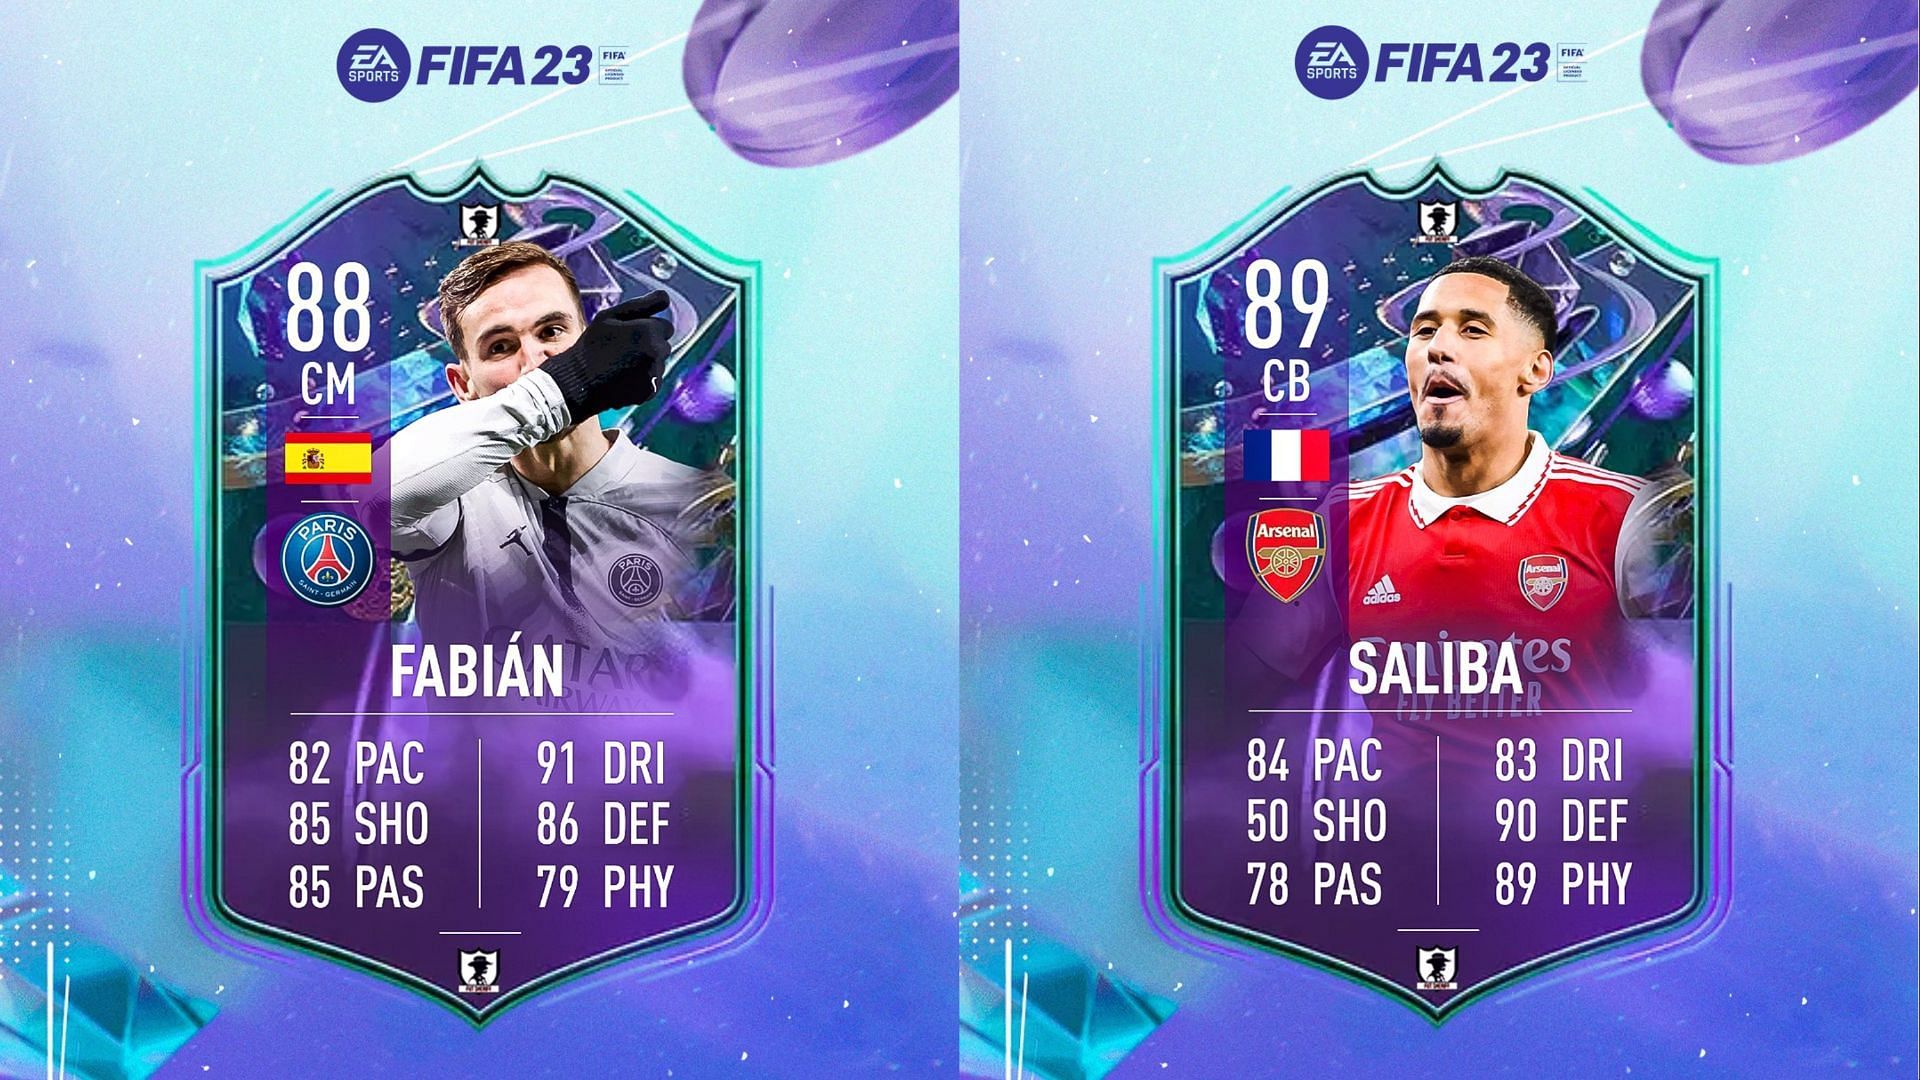 William Saliba and Fabian Ruiz&rsquo;s Fantasy FUT promo cards could greatly help many FIFA 23 players (Images via Twitter/FUT Sheriff)